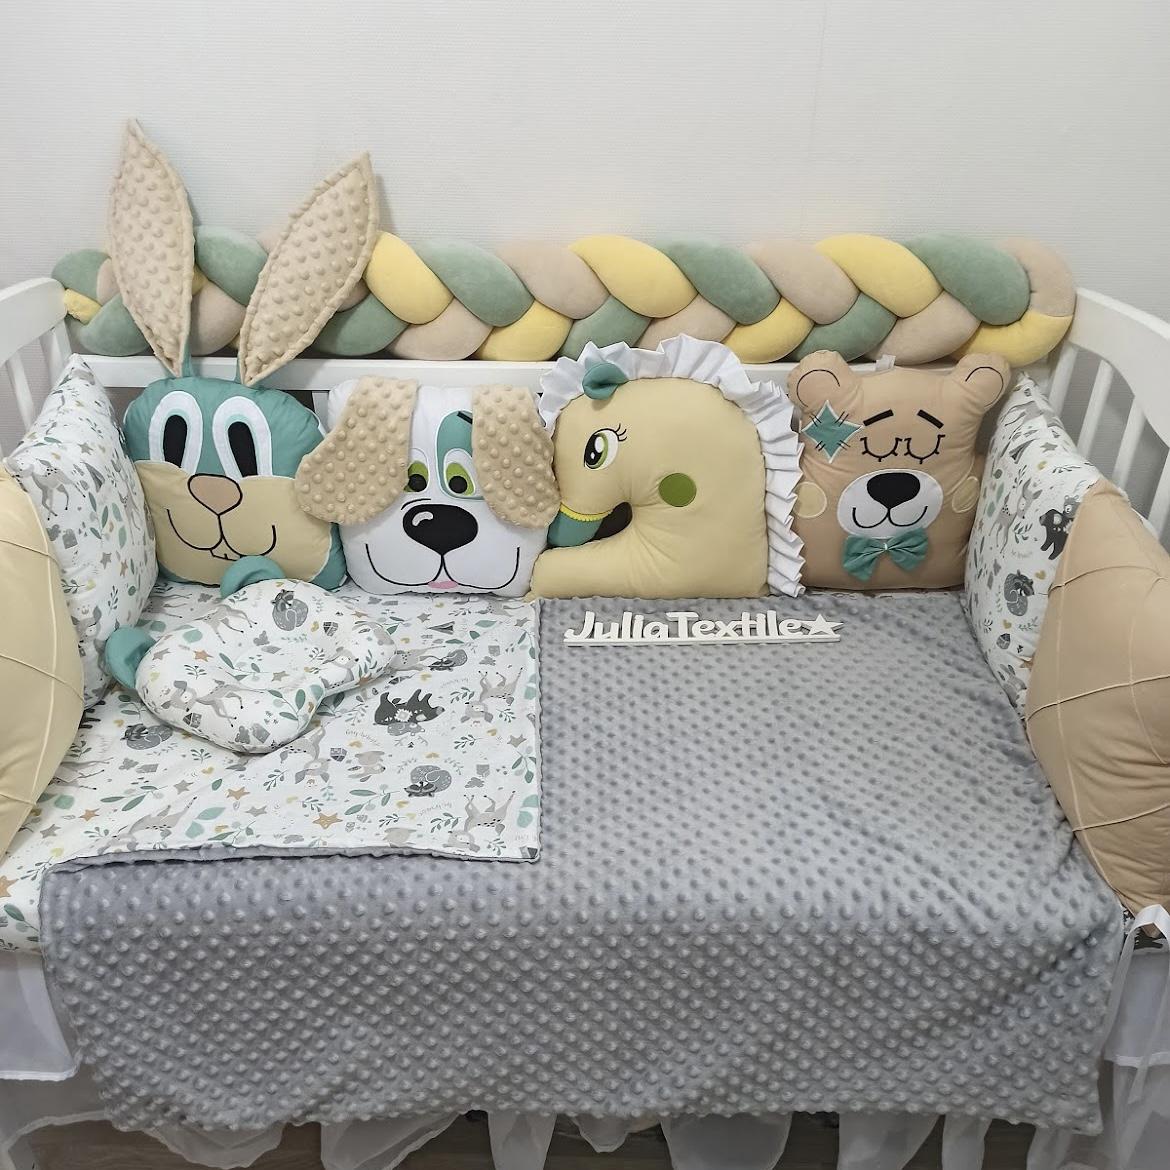 Character cushions in the colorful forest